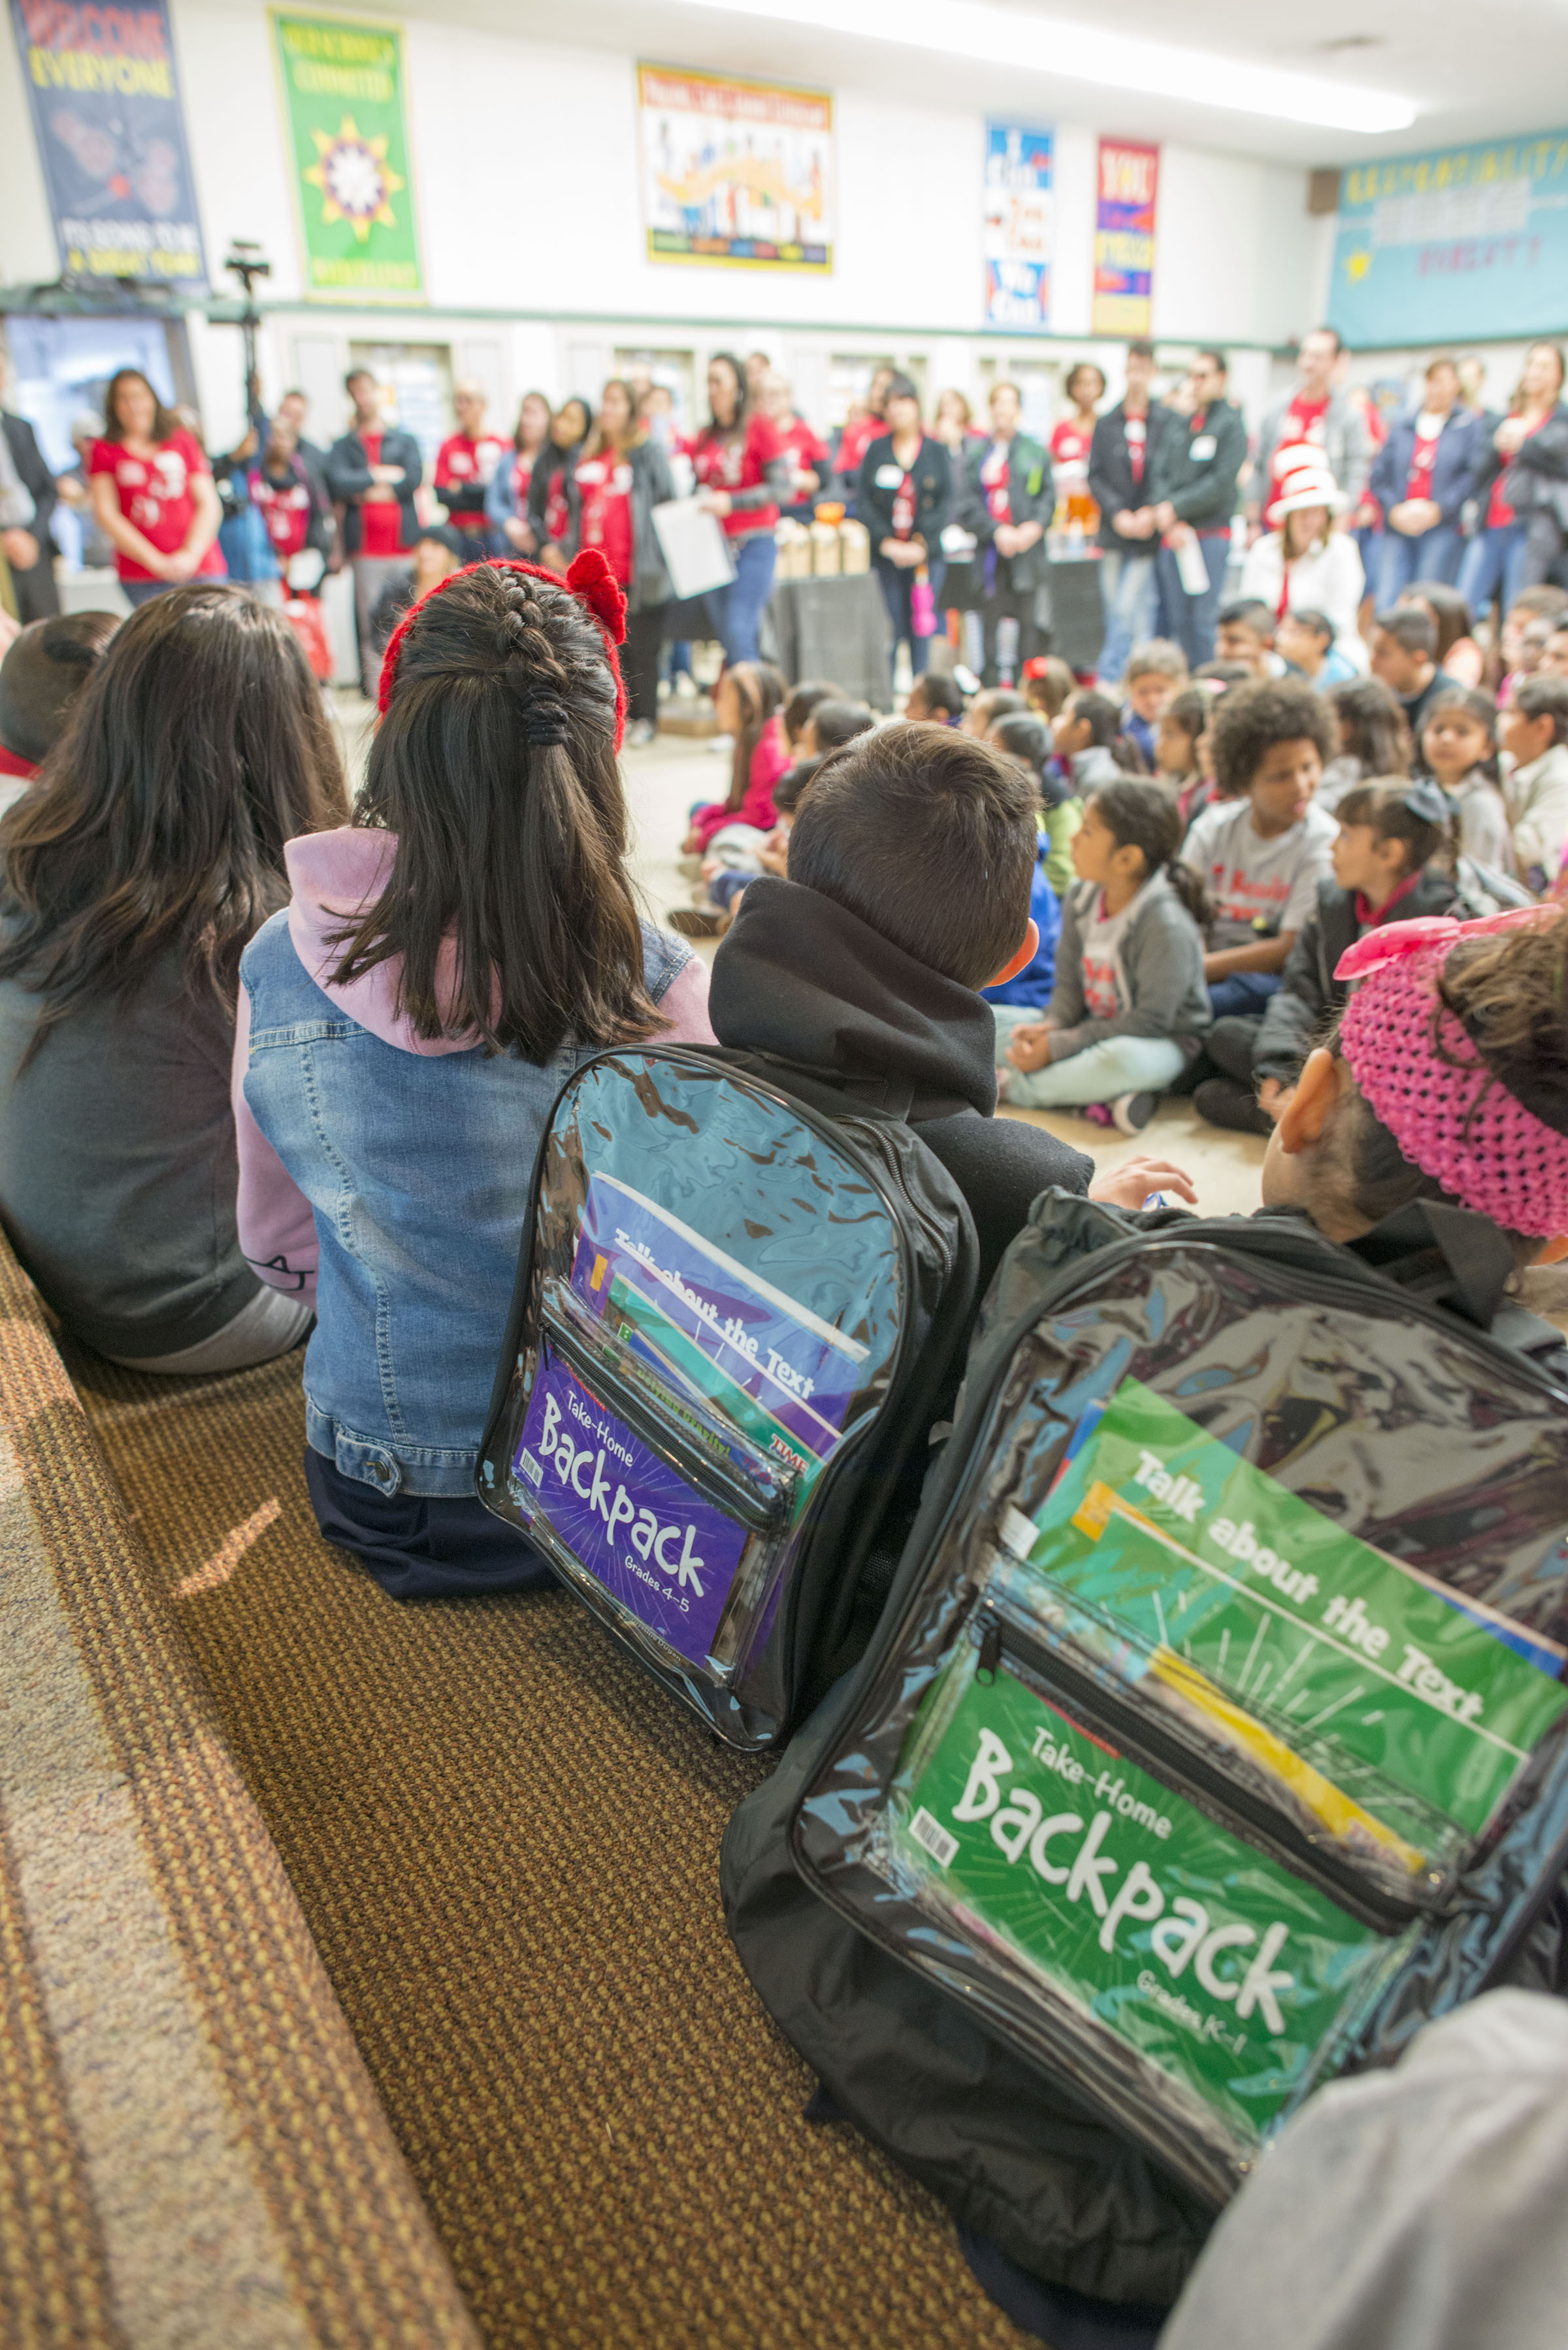 Teacher Created Materials donated a backpack with books and activities to nearly 1500 students for Read Across America